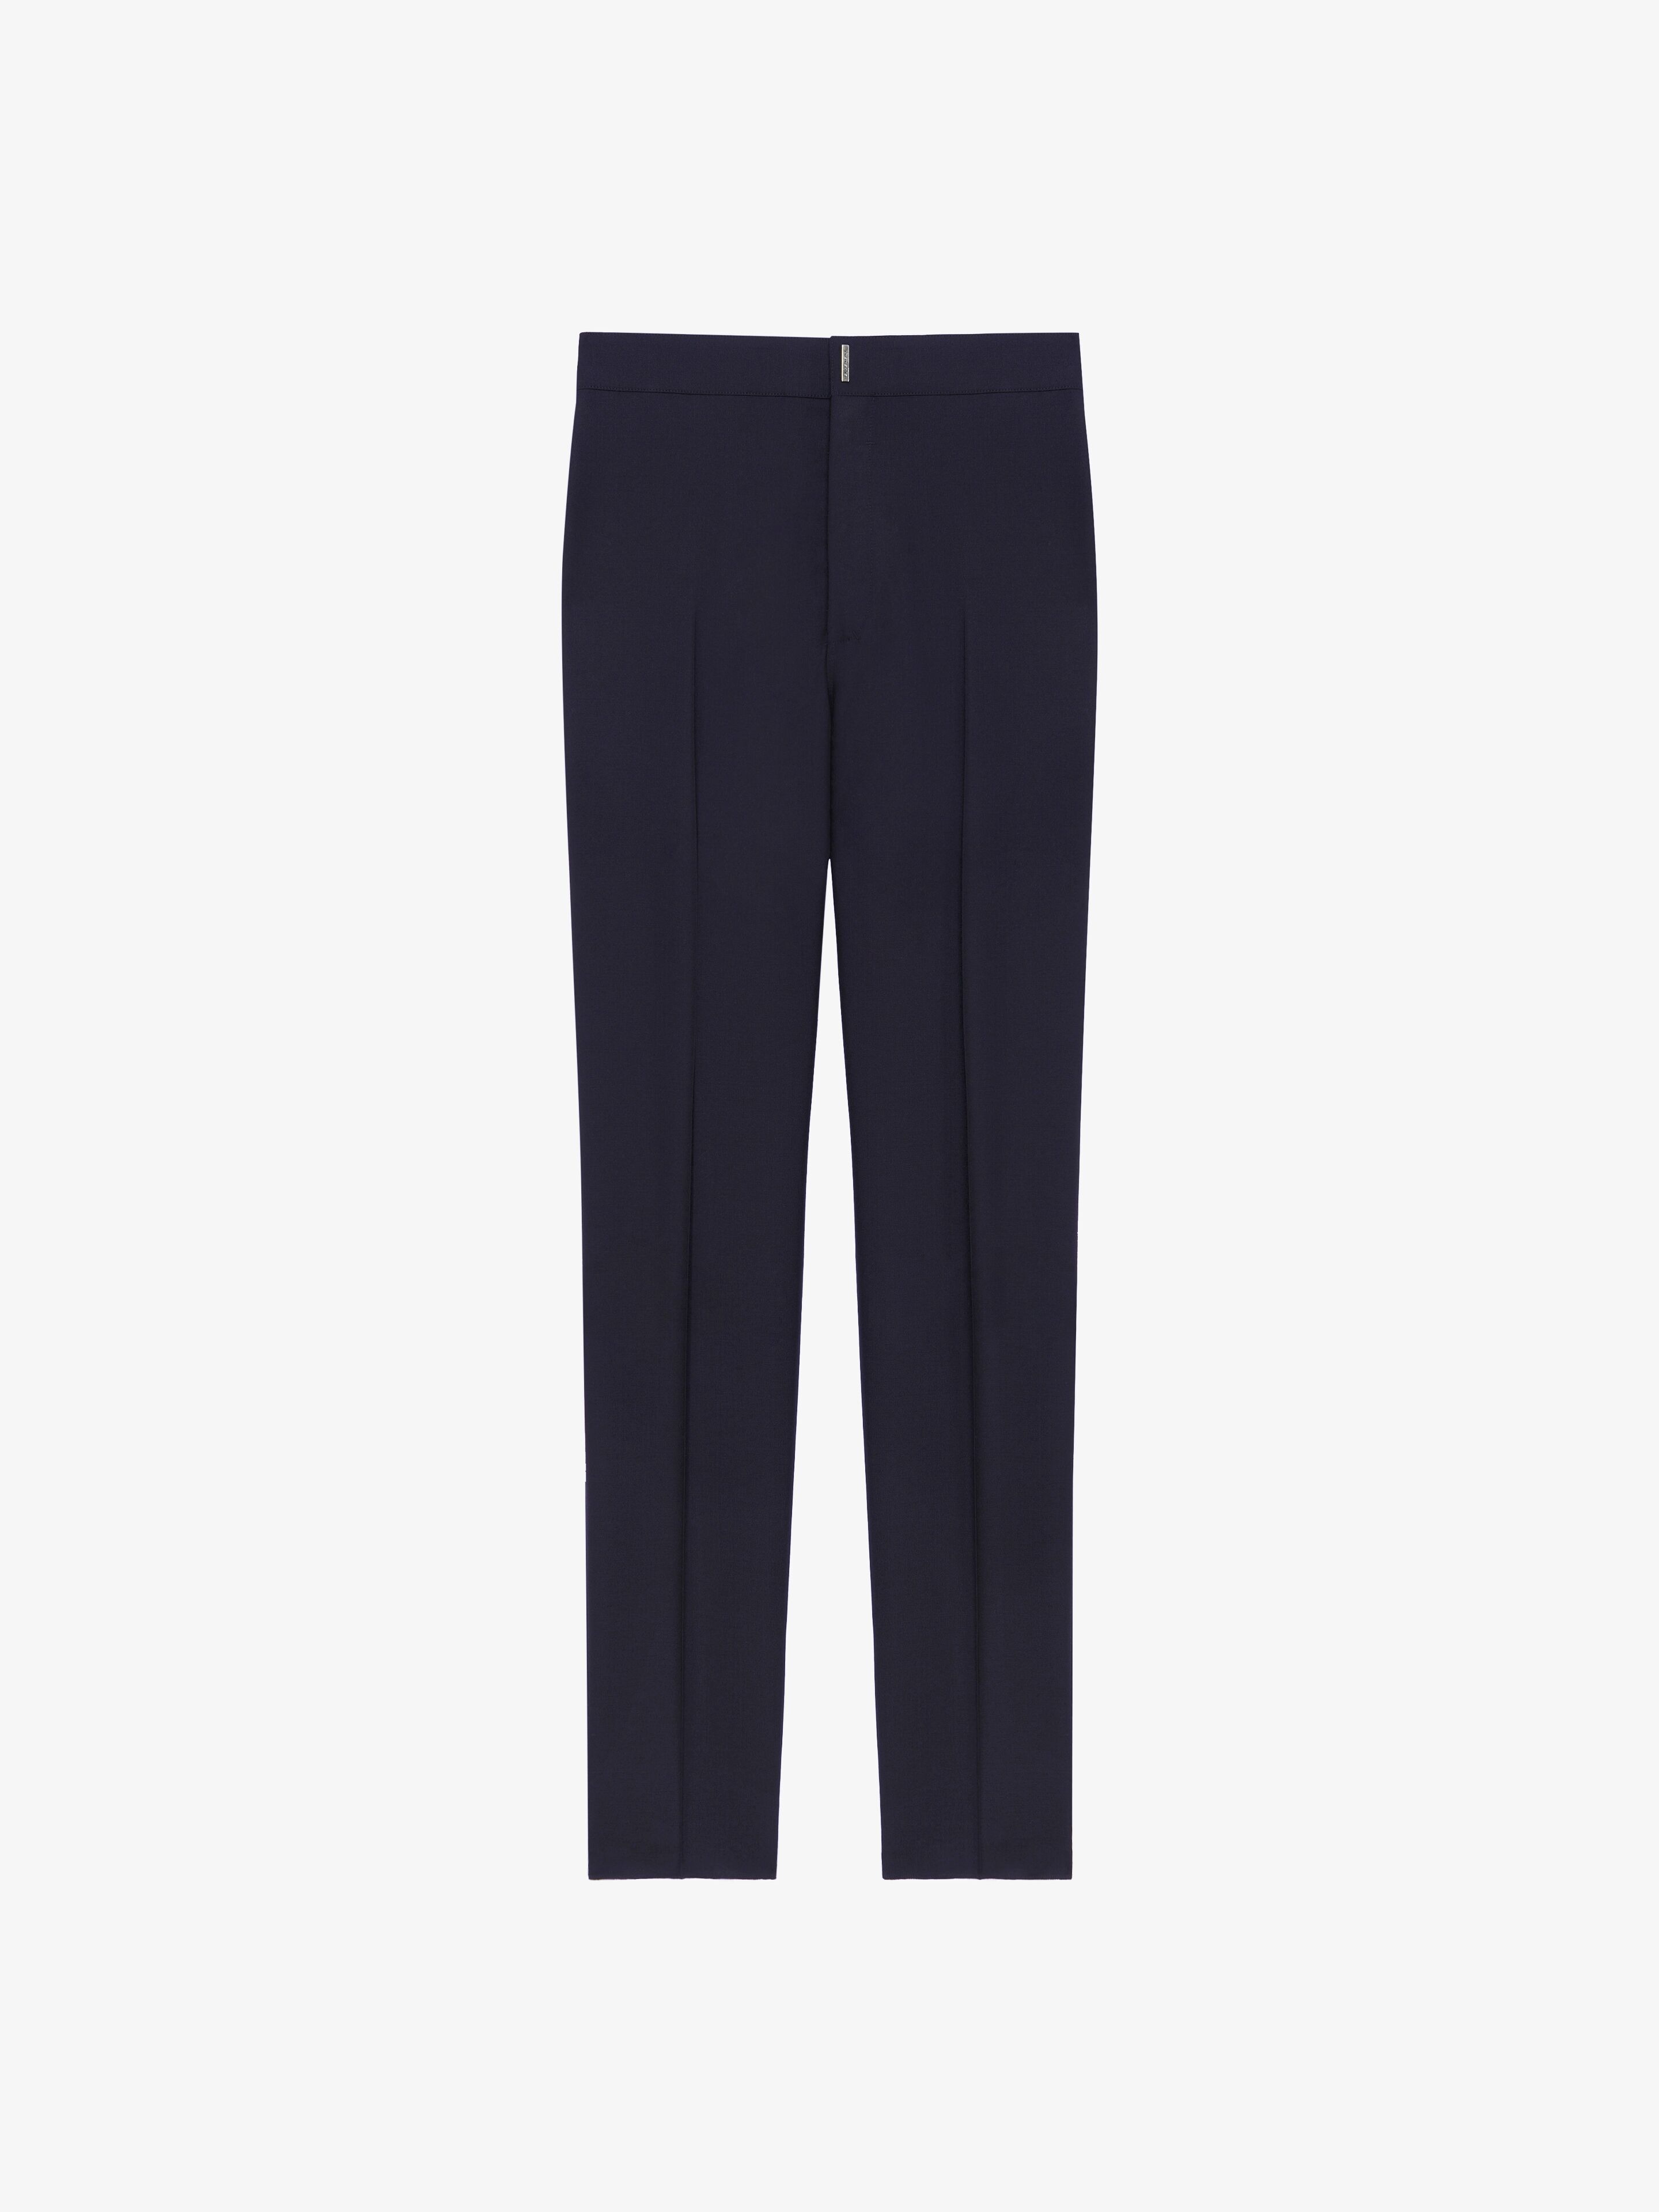 GIVENCHY SLIM-FIT PANTS IN TECHNICAL WOOL